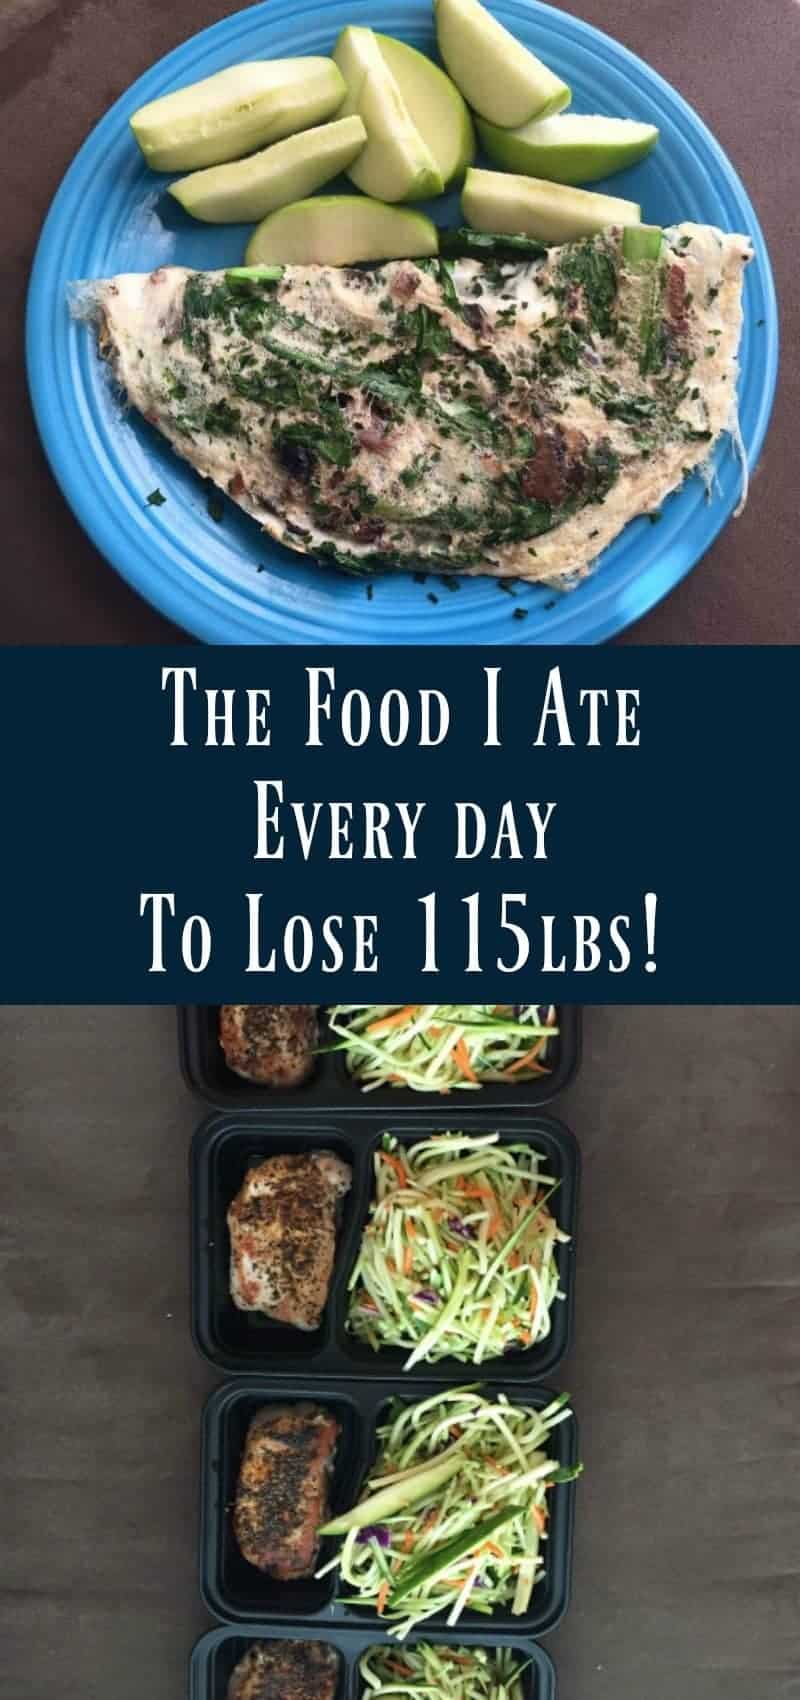 The Food I Ate Every Day to Lose 115lbs!